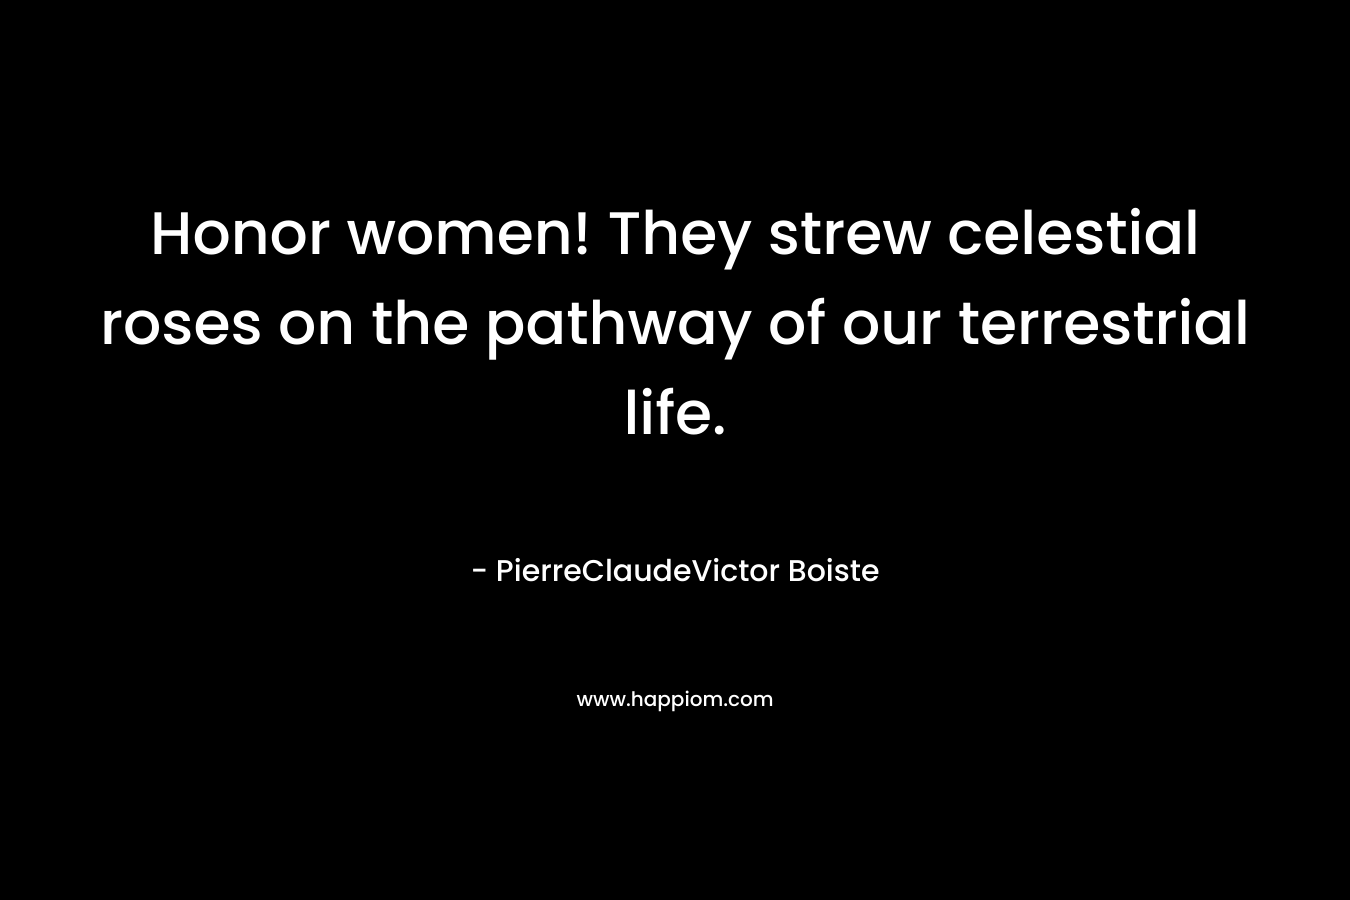 Honor women! They strew celestial roses on the pathway of our terrestrial life. – PierreClaudeVictor Boiste